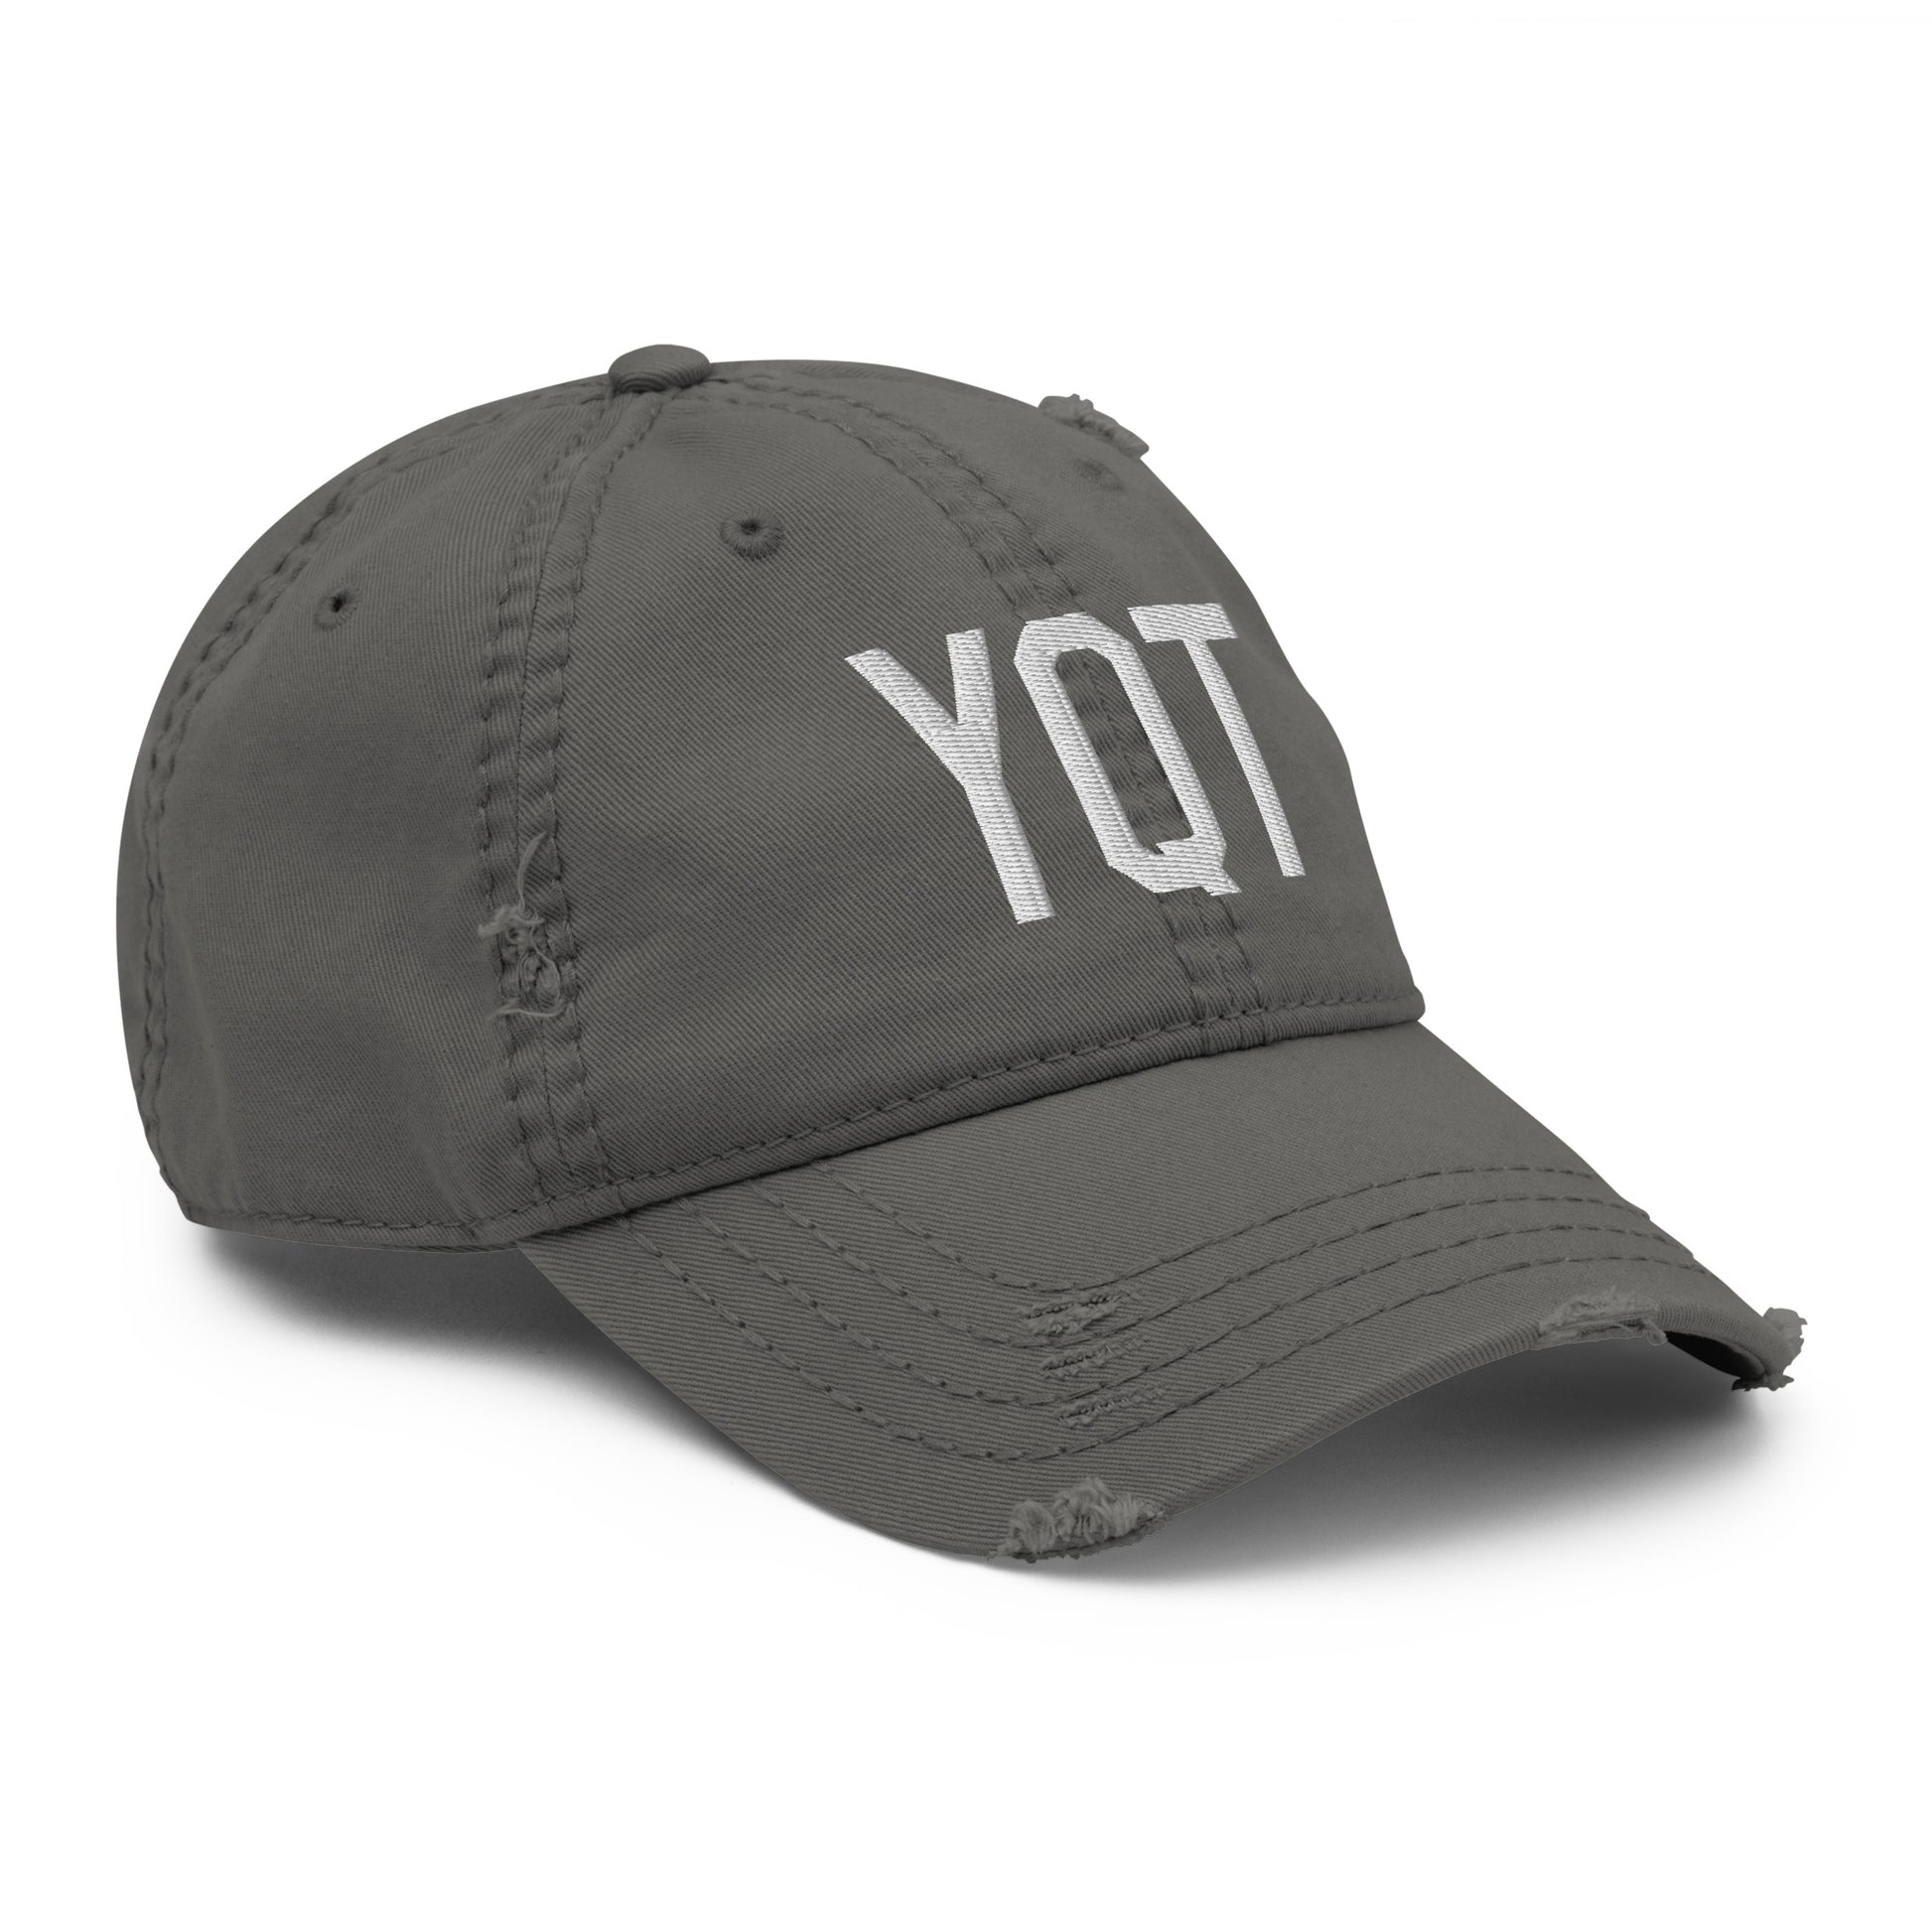 Airport Code Distressed Hat - White • YQT Thunder Bay • YHM Designs - Image 17